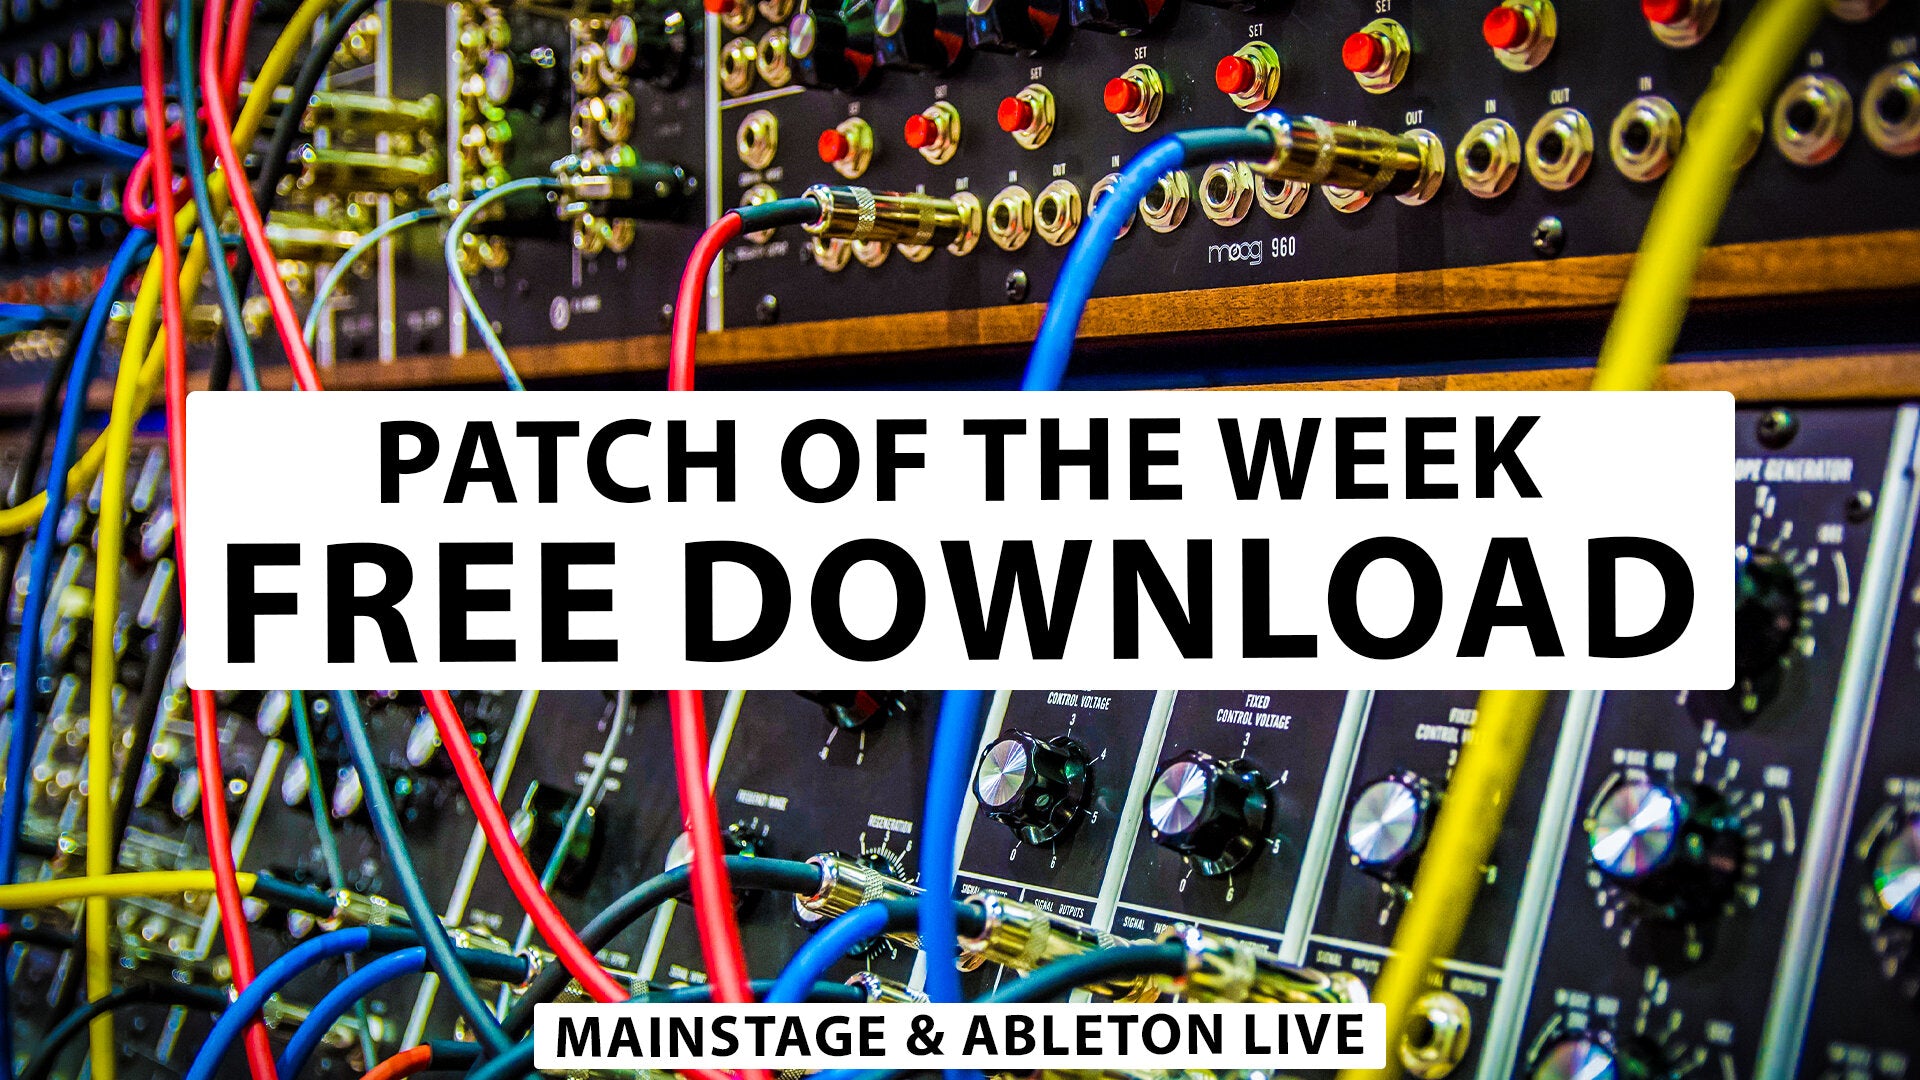 Squeaky Synth - Free MainStage & Ableton Worship Patch!